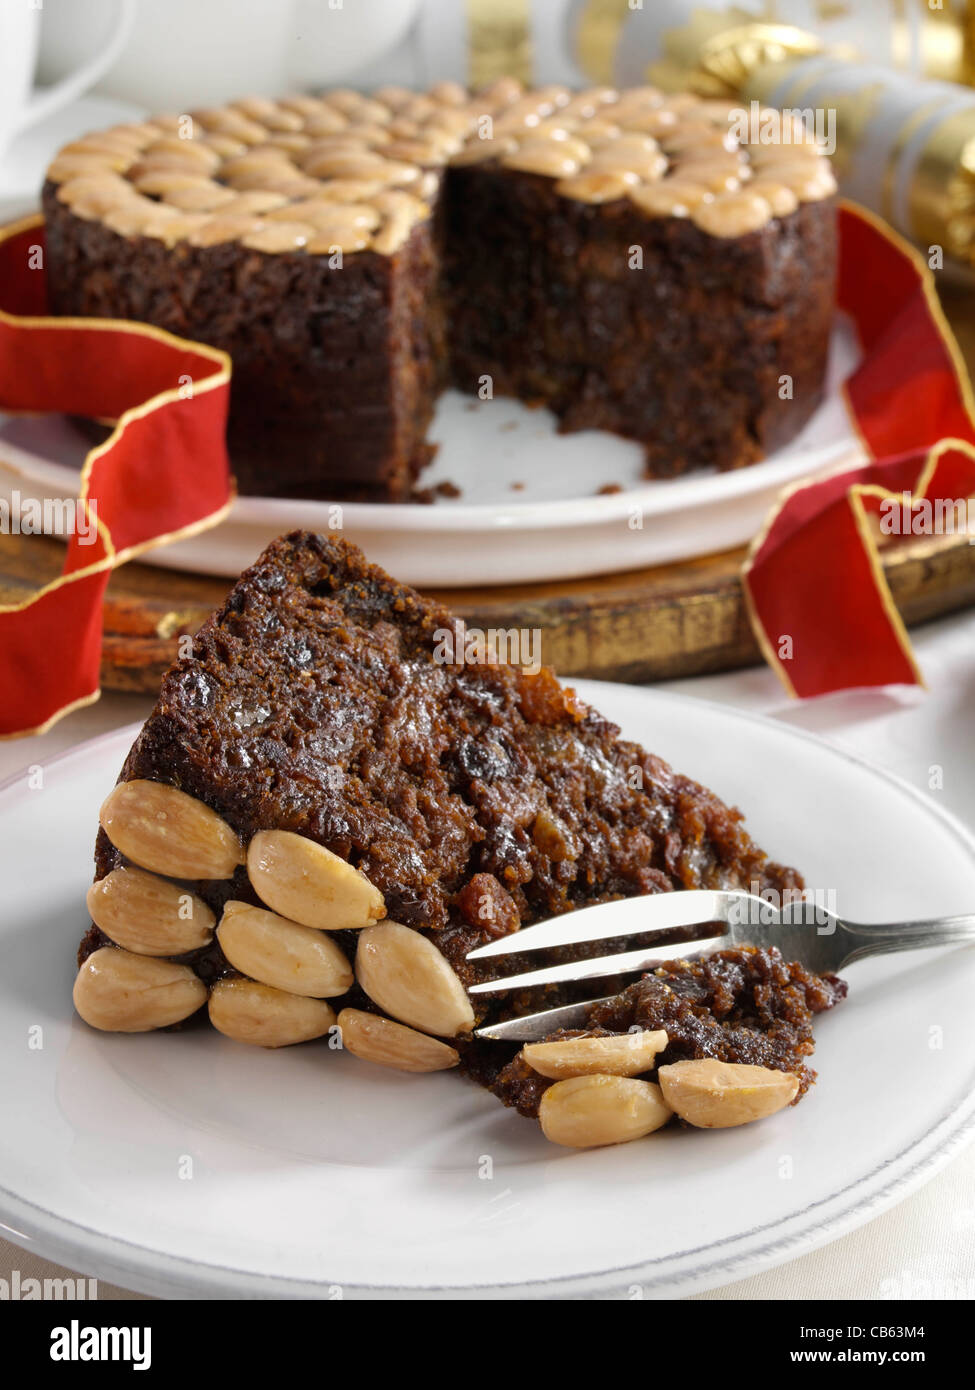 UK Christmas cake with a slice in front Stock Photo